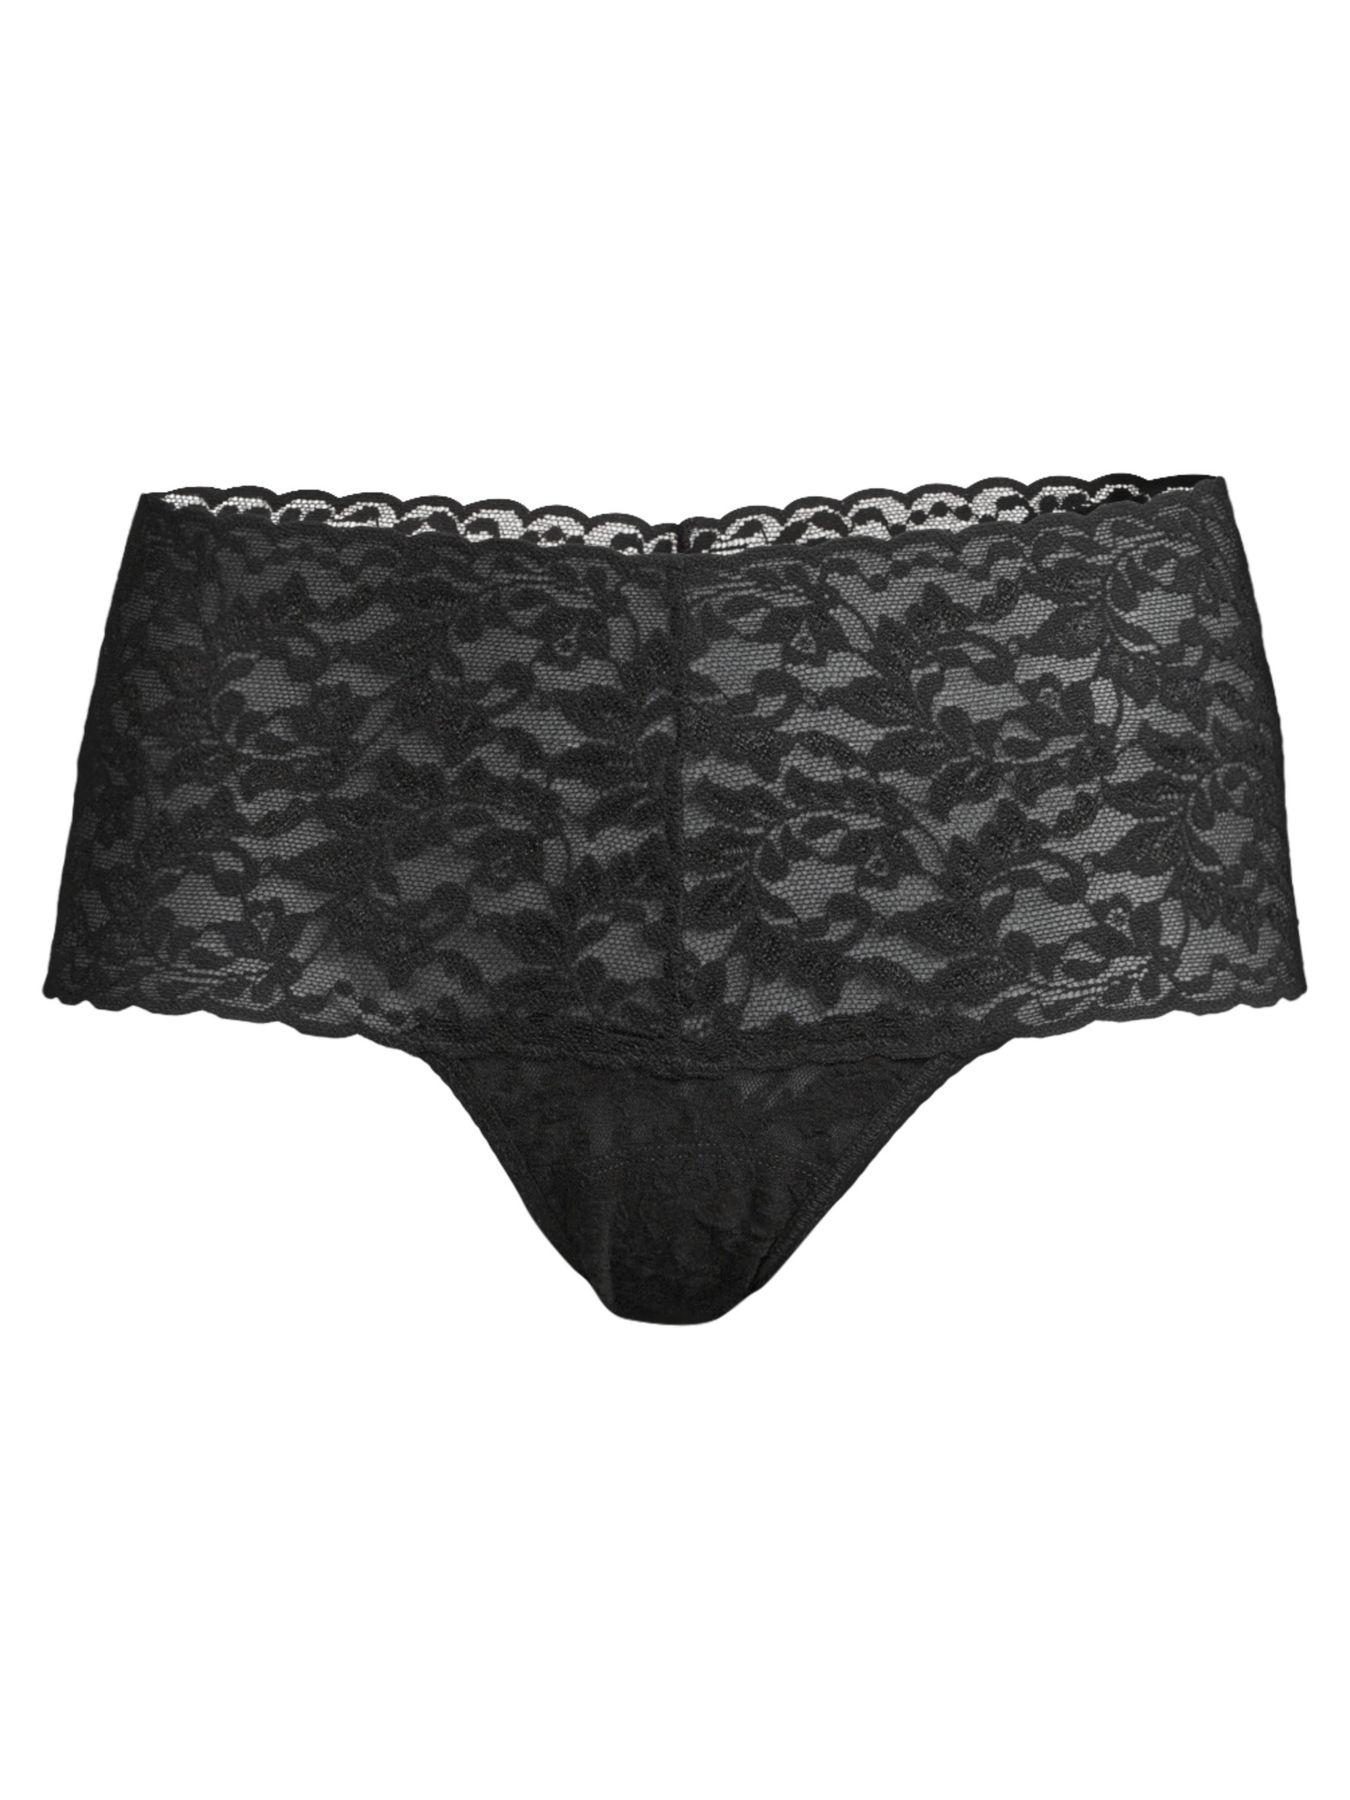 Hanky Panky Lace Retro Thong in Black - Save 74% - Lyst